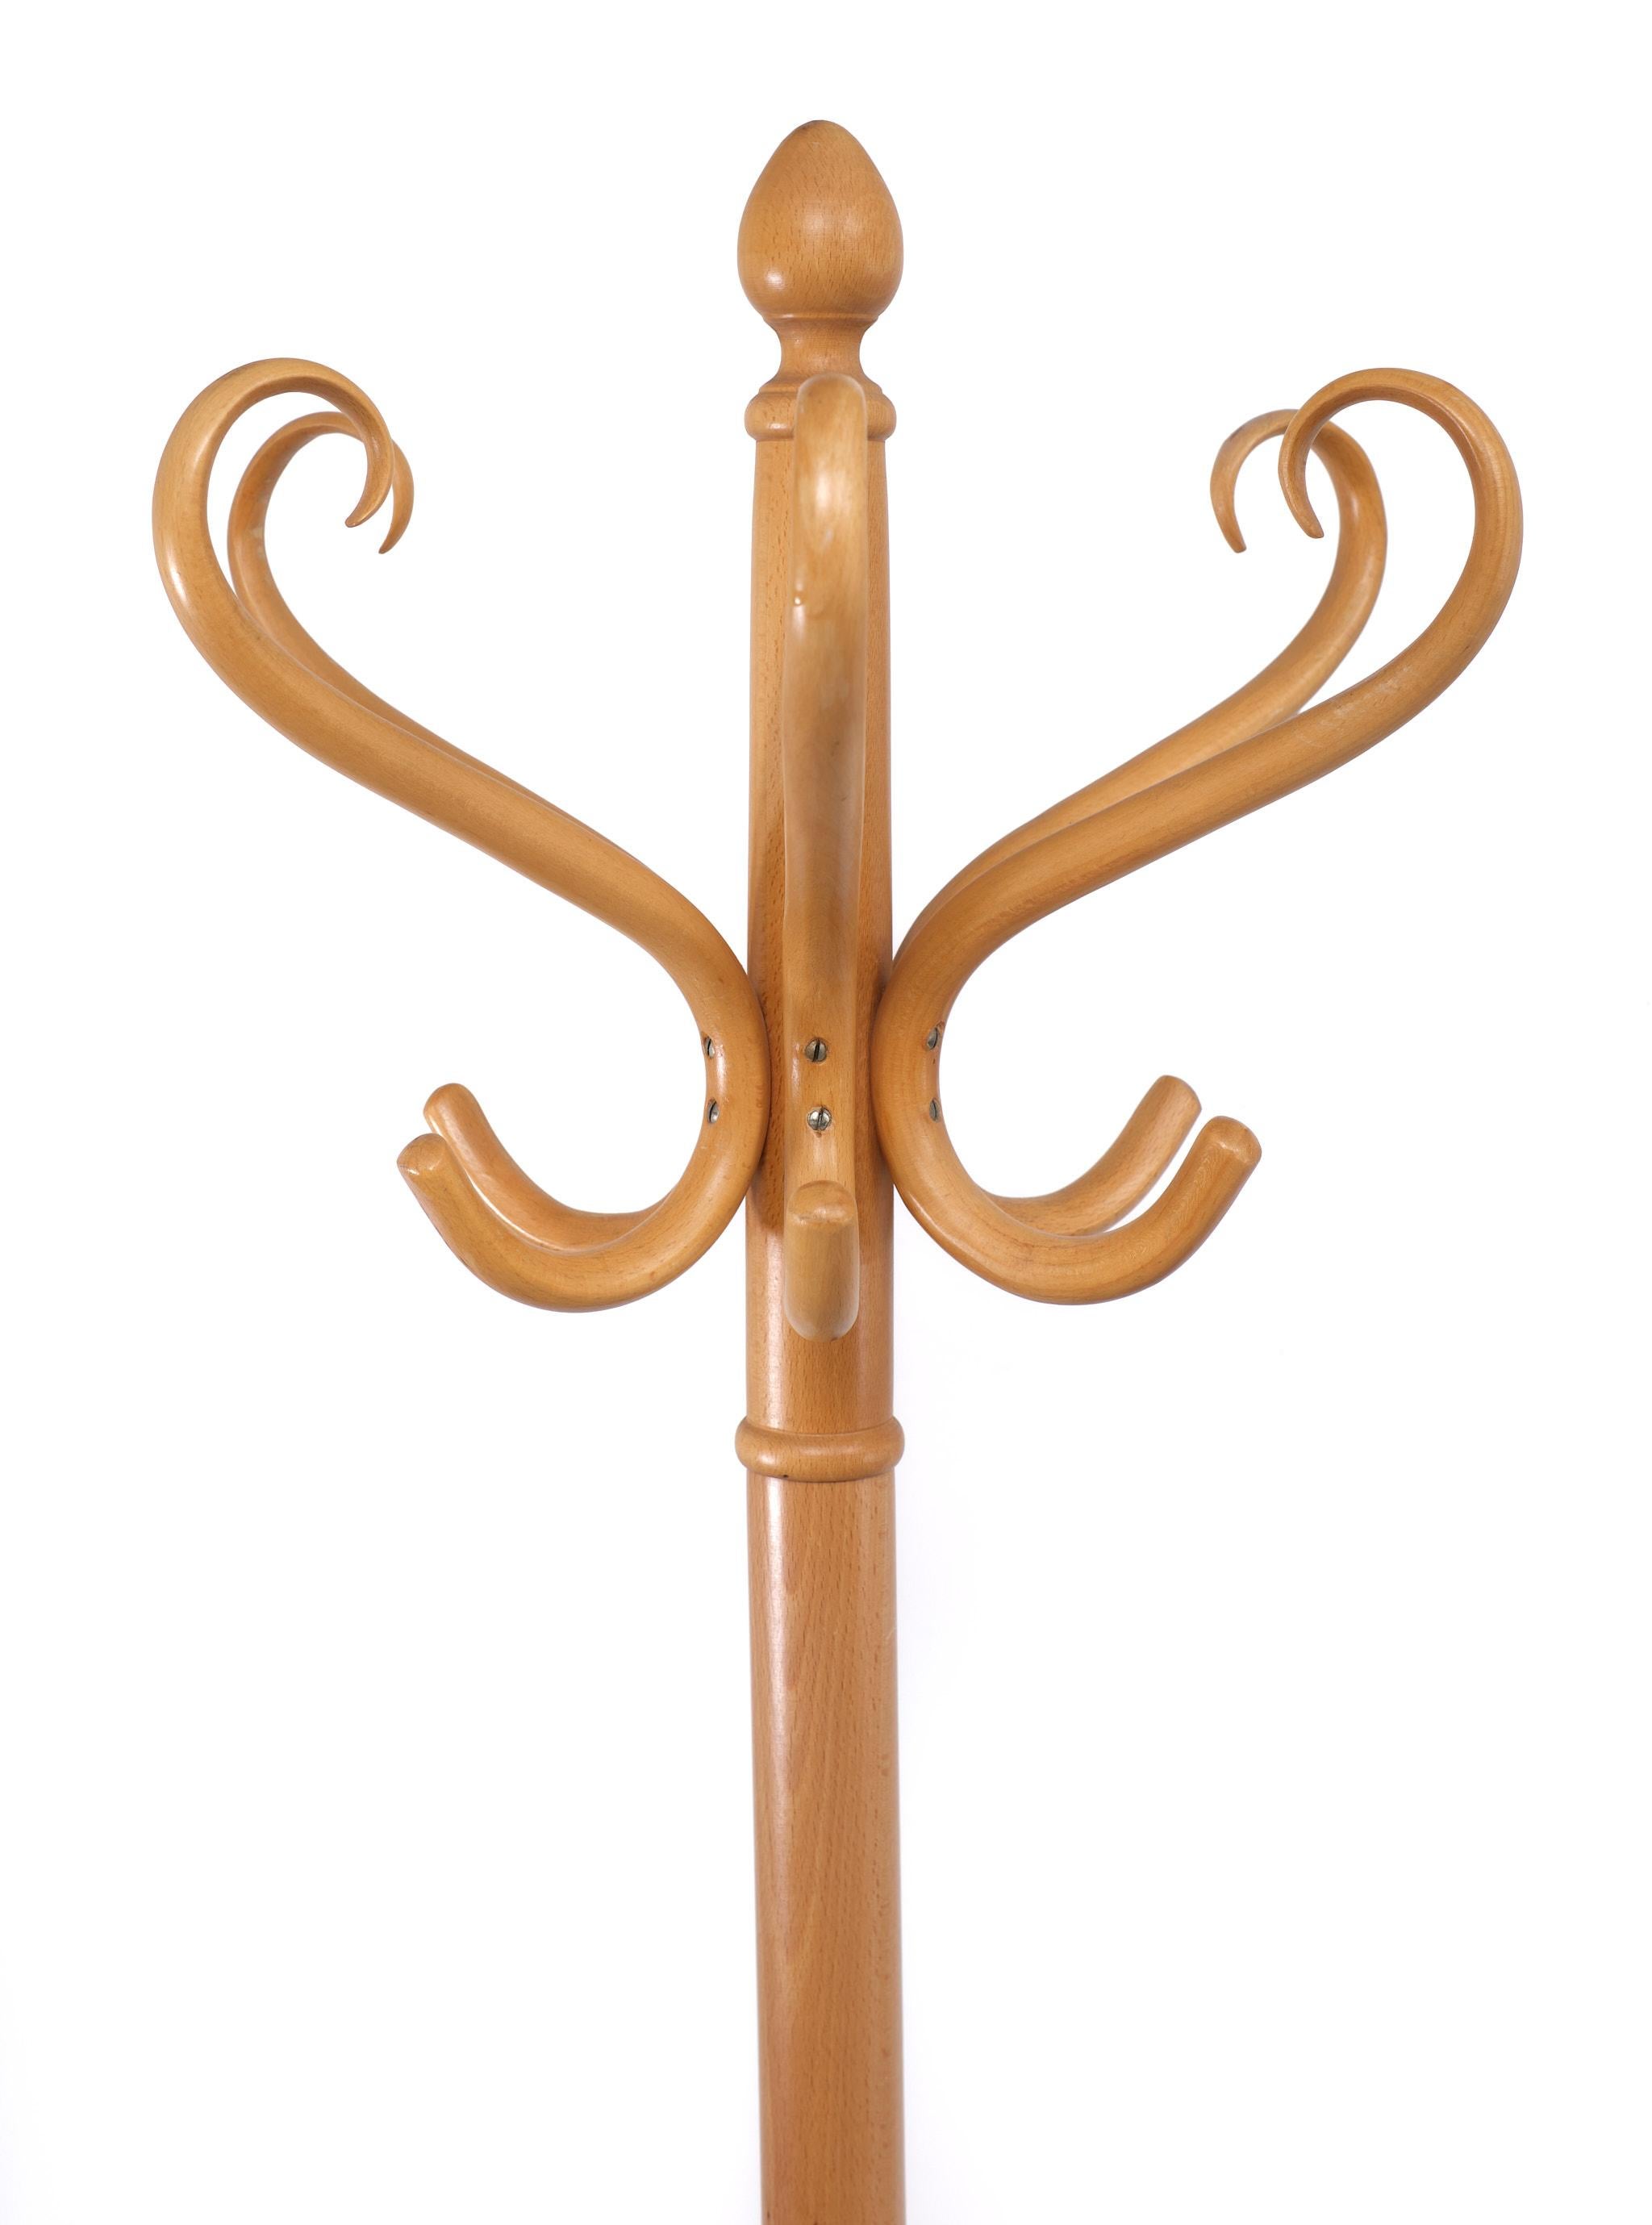 Very nice standing coat rack and umbrella stand .Solid Beechwood .
Steam bended . Very good condition, comes in four parts, easy to send . 

Please don't hesitate to reach out for alternative shipping quotes